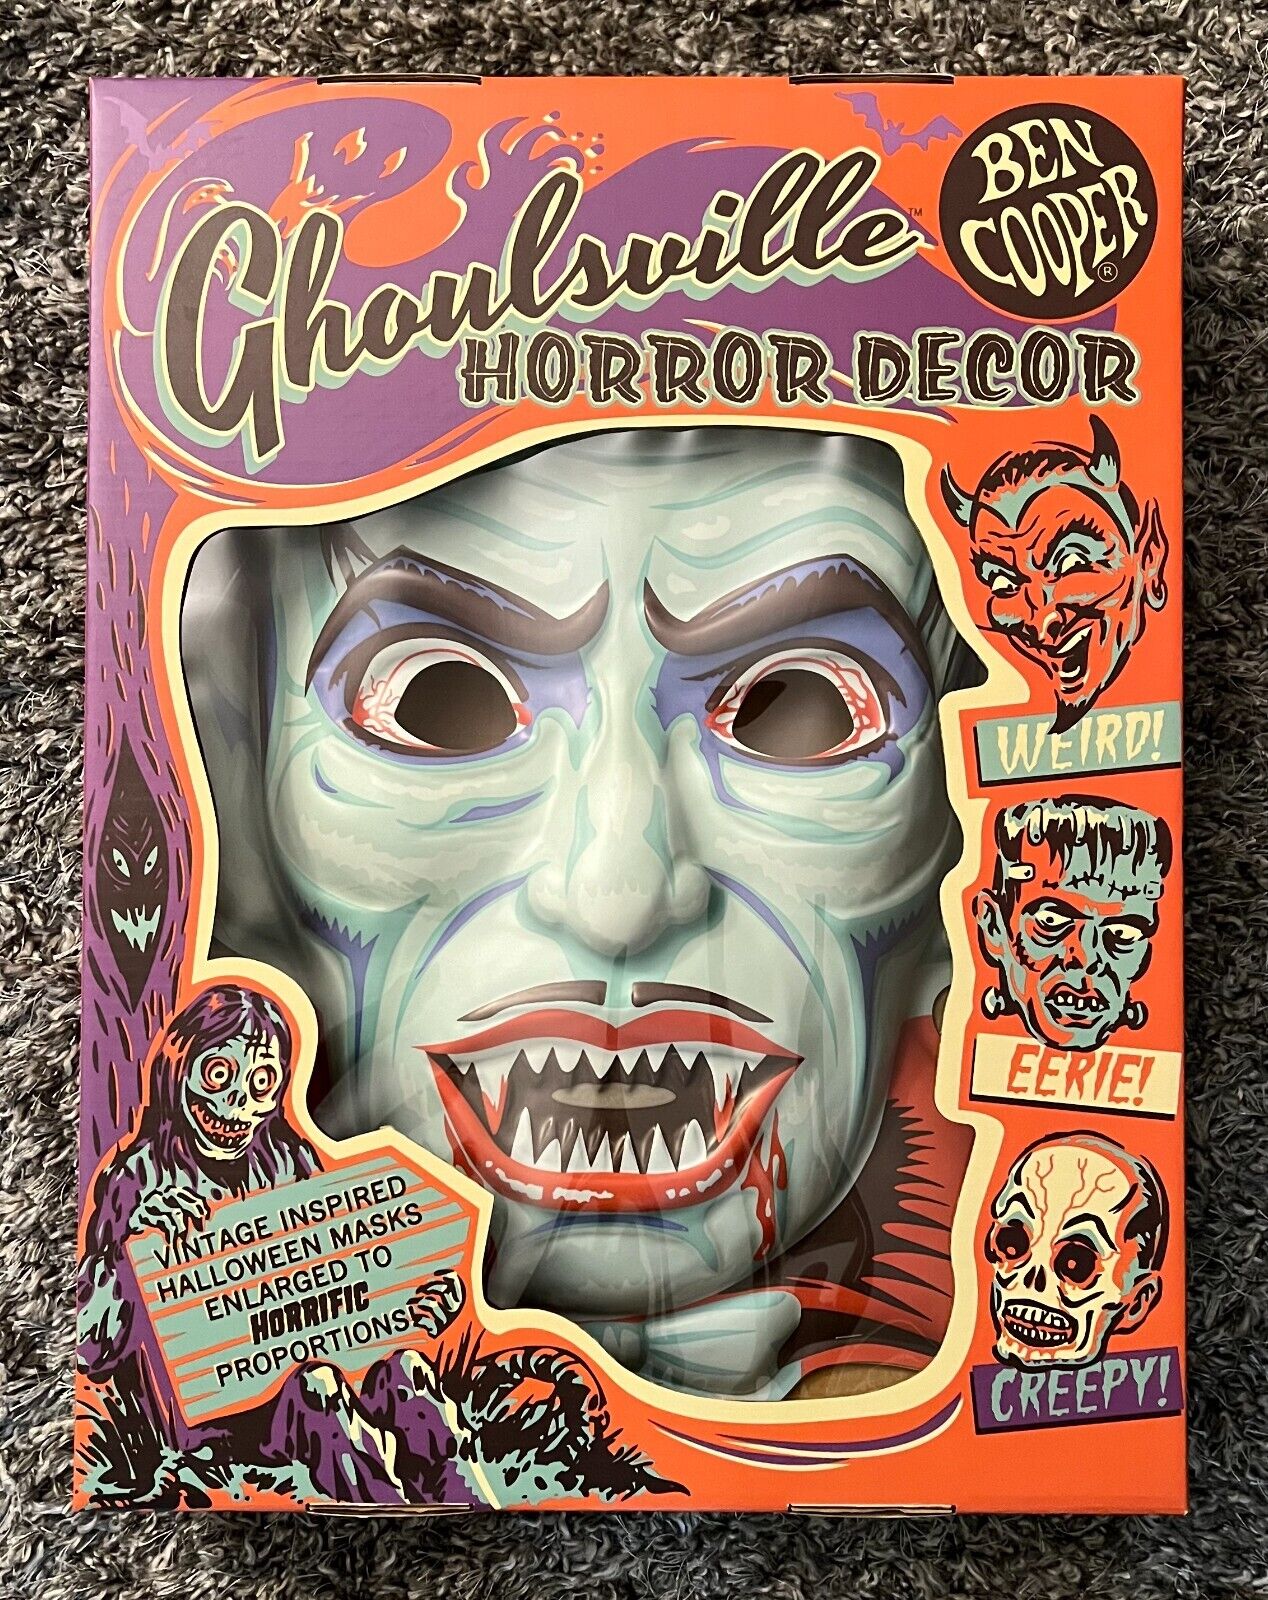 Ghoulsville Horror Decor Retro A-Go-Go Giant Vacuform 3D Mask BLOOD OF DRACULA